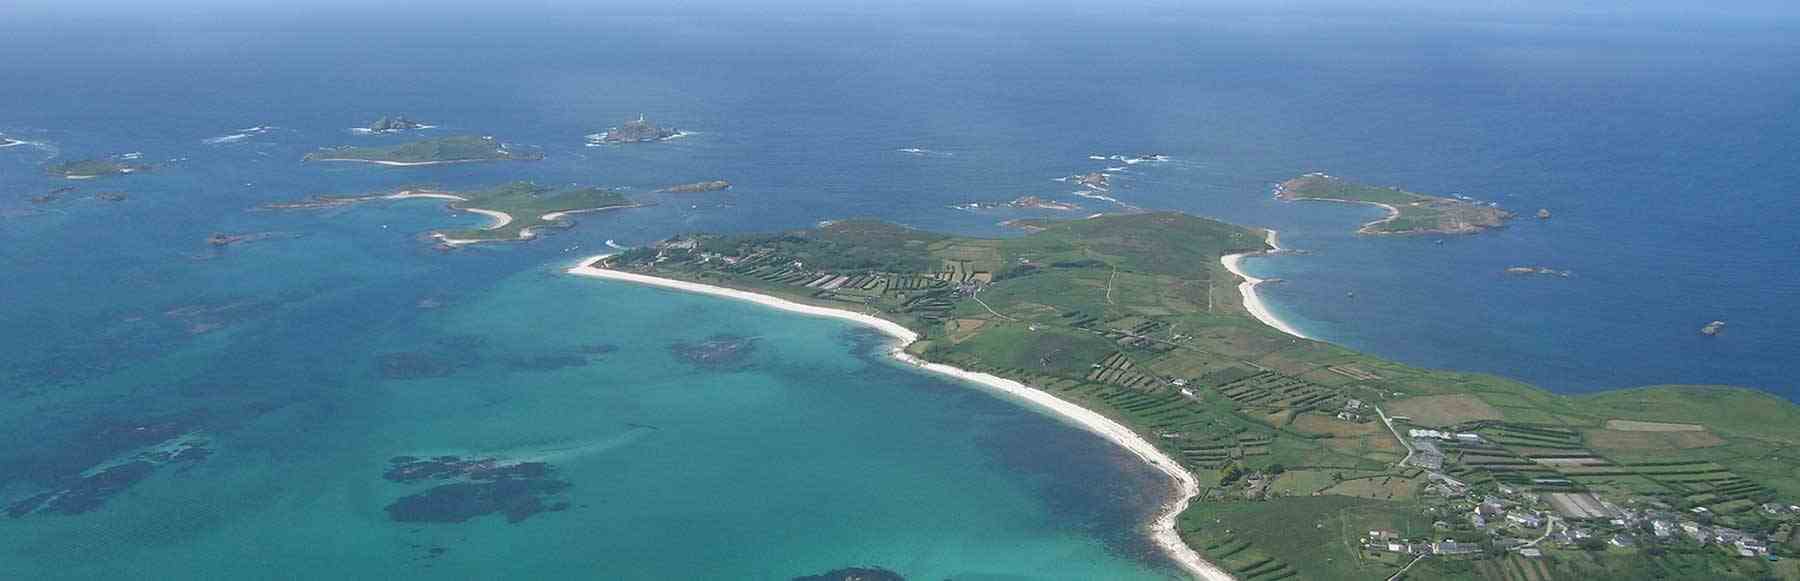 Isles of Scilly)